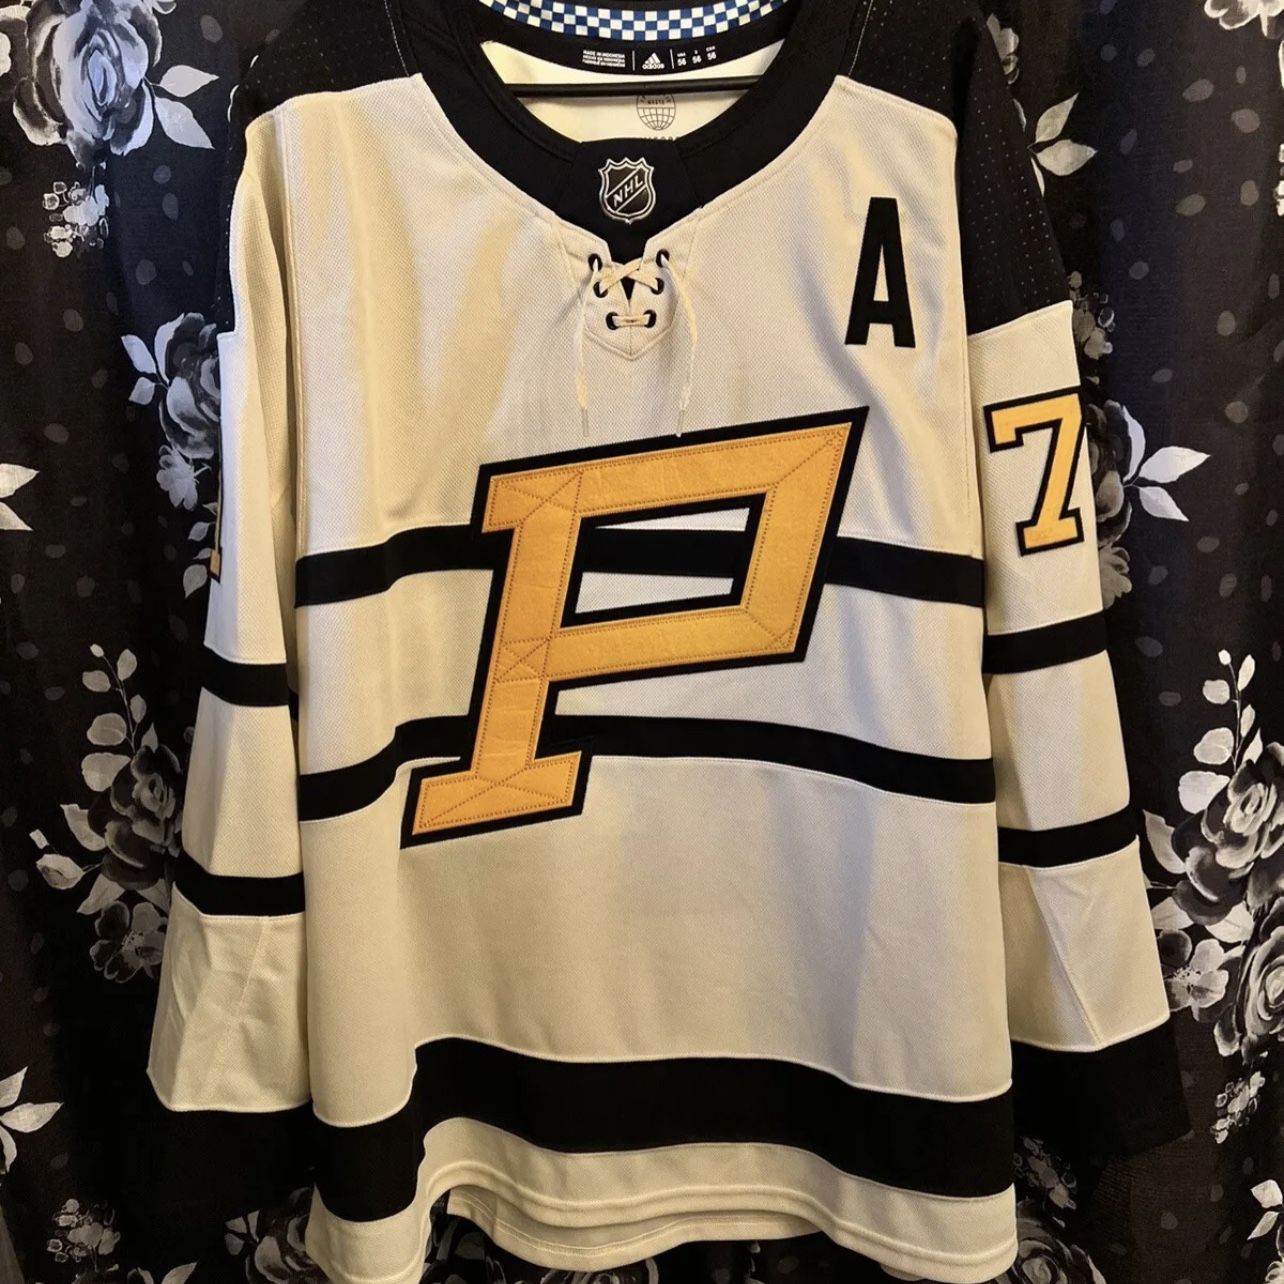 Penguins Winter Classic Jersey for sale